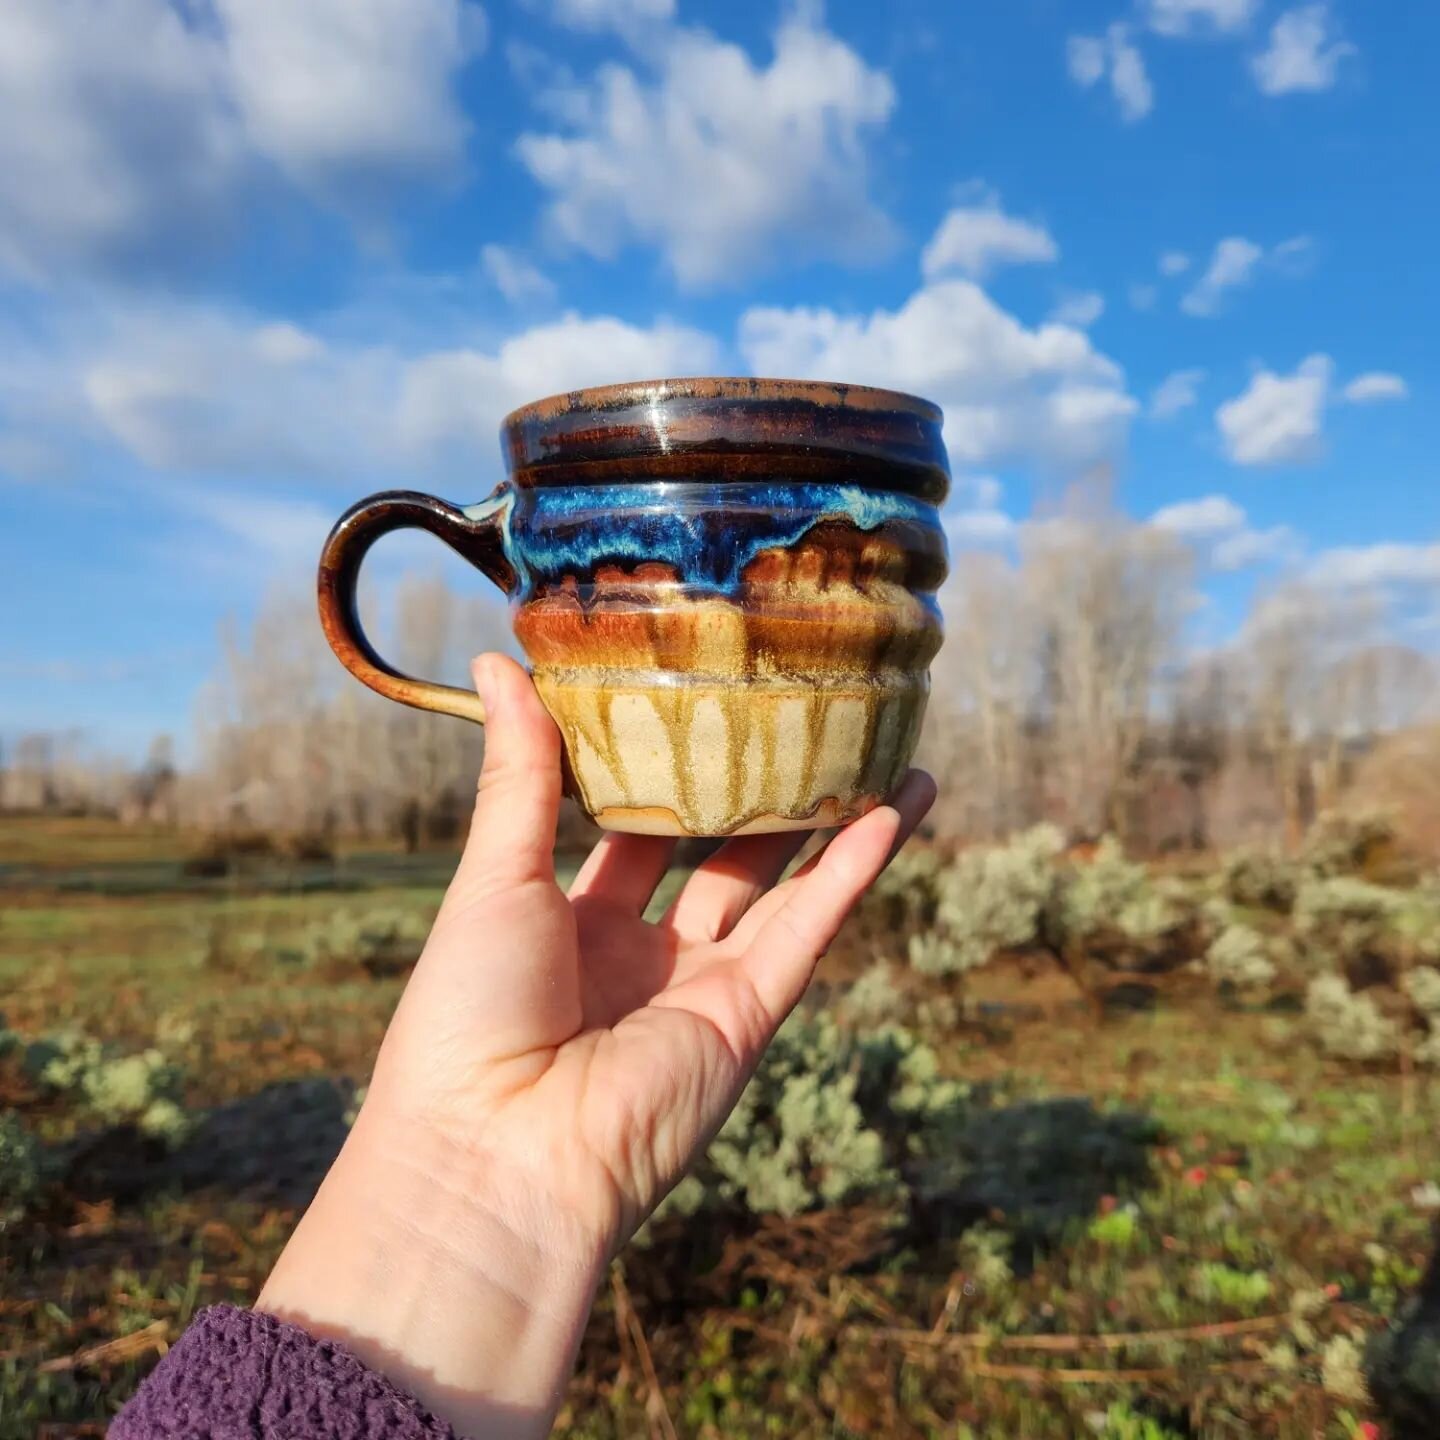 Made this mug a looong time ago and it had some flaws, so it stayed home with me as most of my seconds do. It has slowly become one of my favorites, flaws and all! 
Appreciating it extra this morning  as Willie and I walk around the property, observi